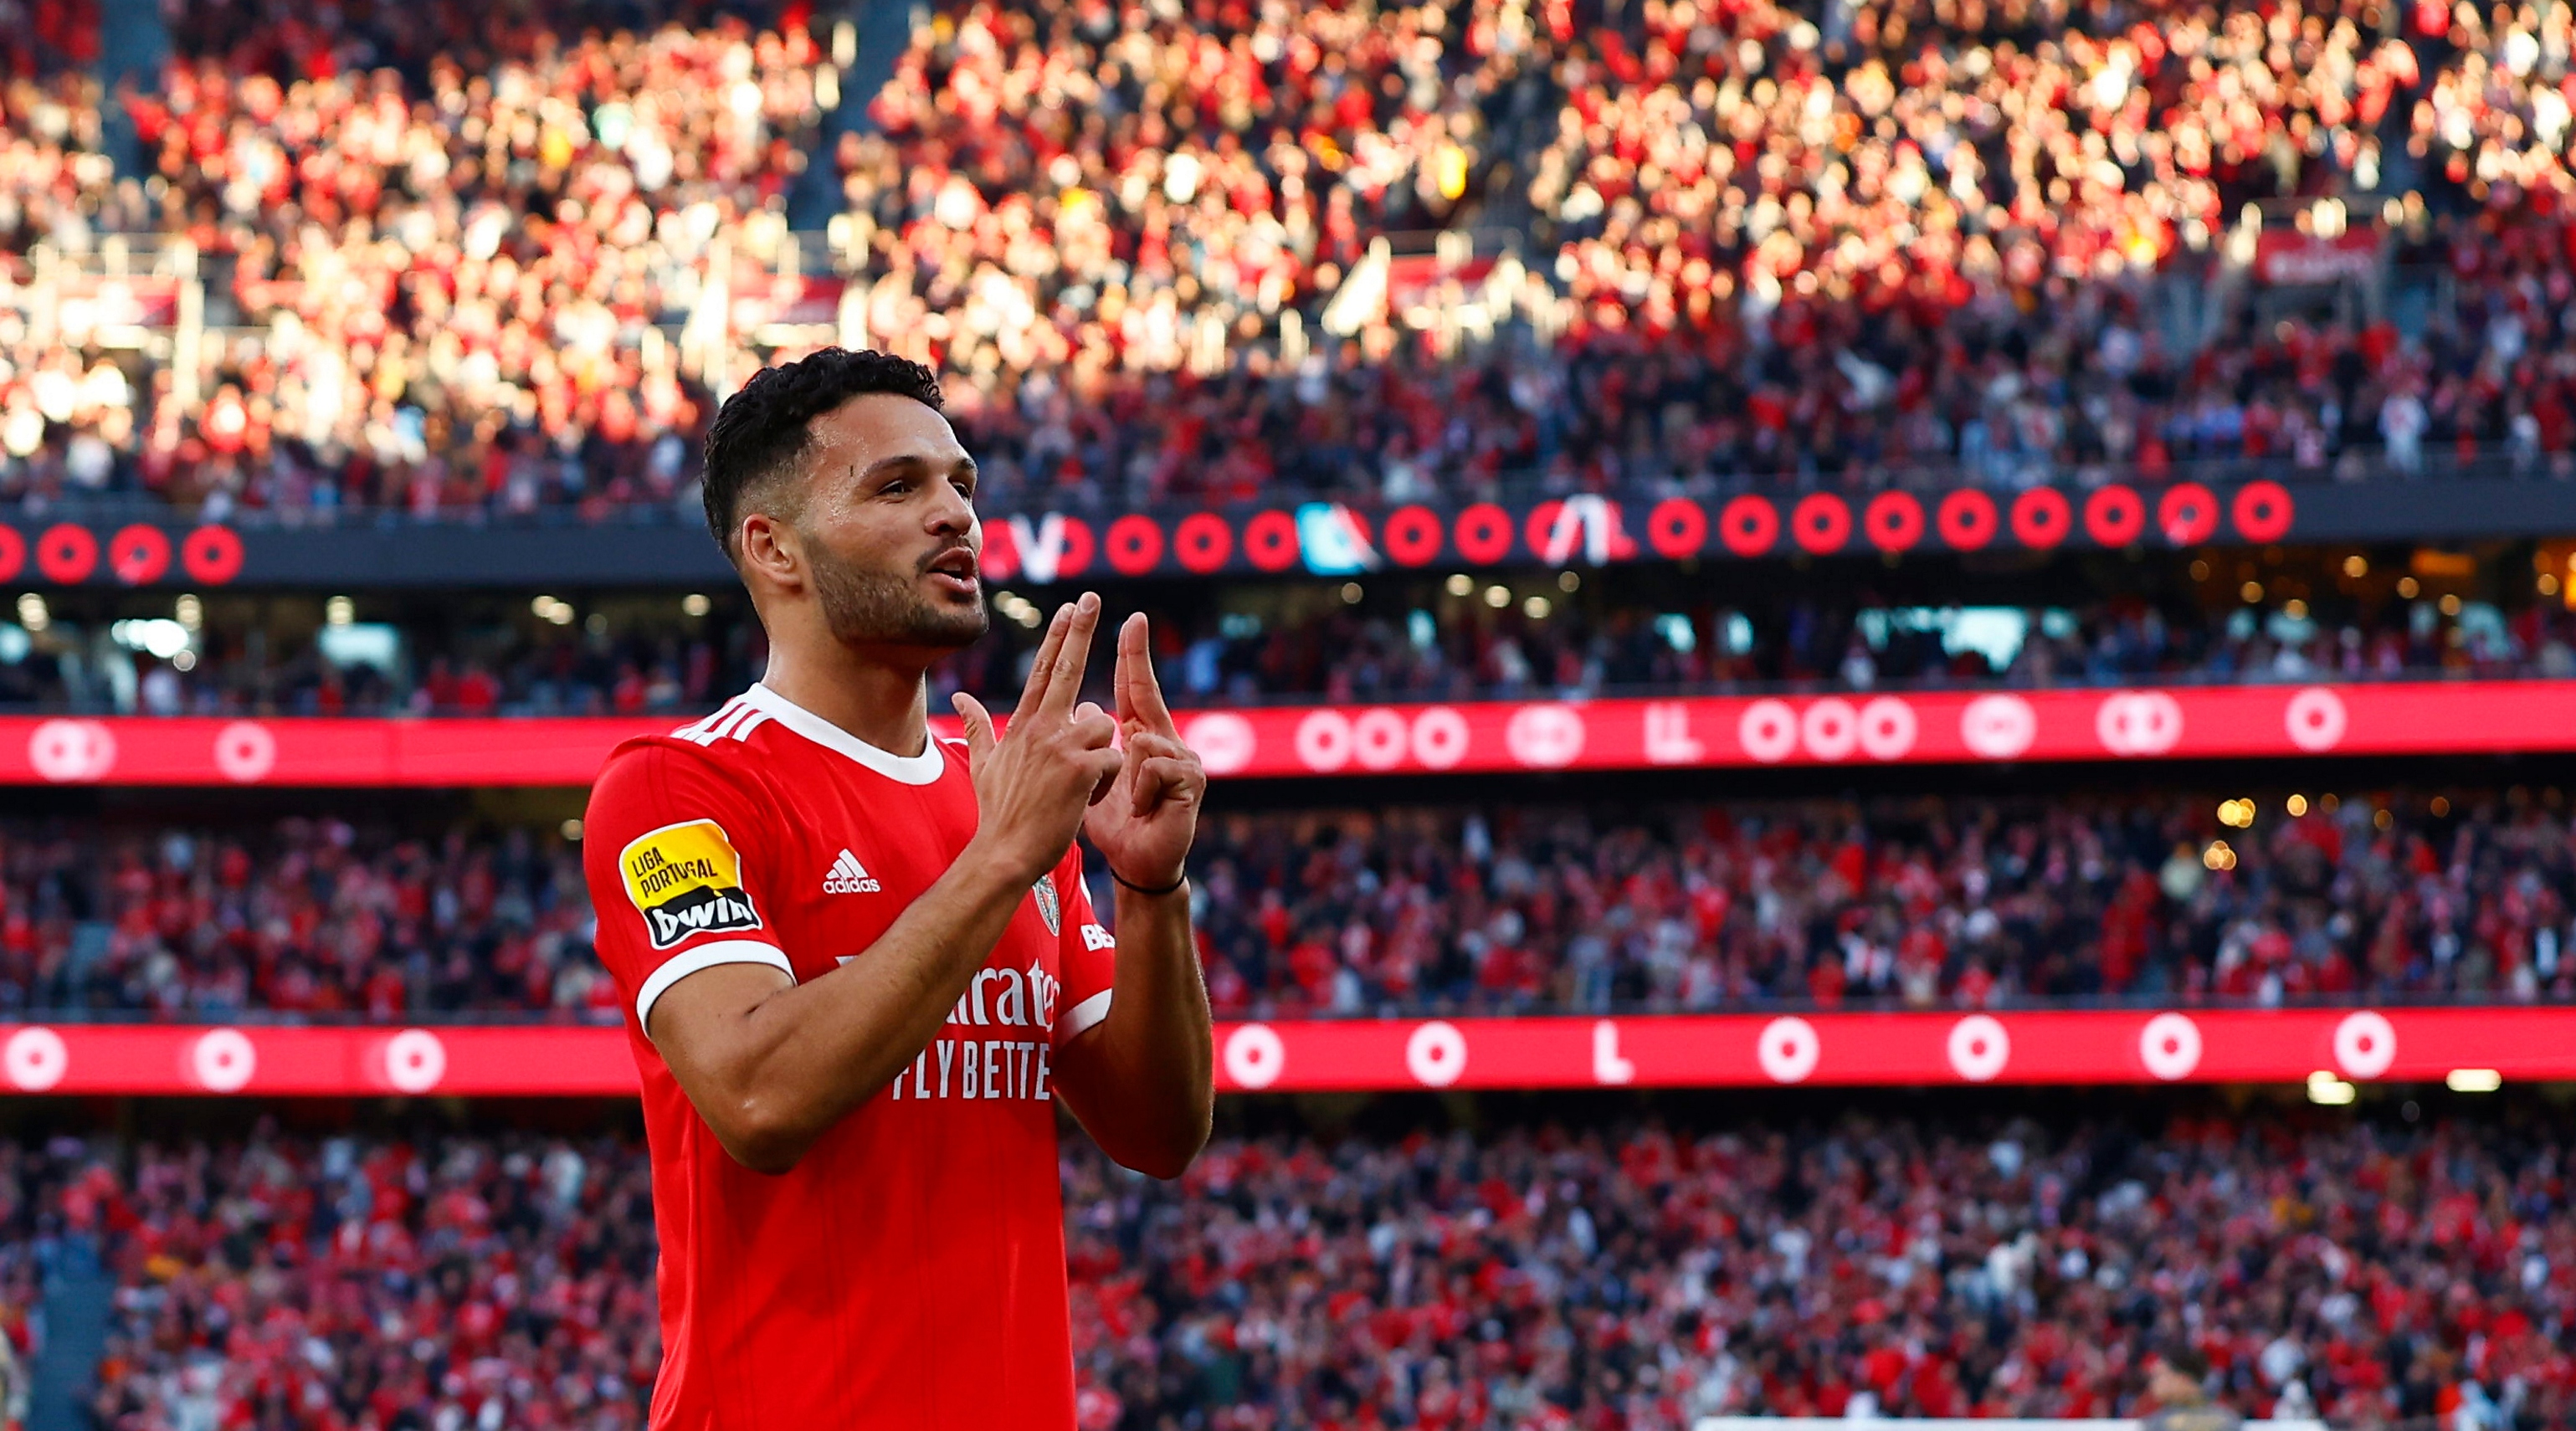 Manchester United rumoured transfer target Goncalo Ramos of Benfica, pictured celebrating his team's second goal during the Primeira Liga match between Benfica and Vitoria Guimaraes at the Estadio do Sport Lisboa e Benfica on March 18, 2023 in Lisbon Portugal.